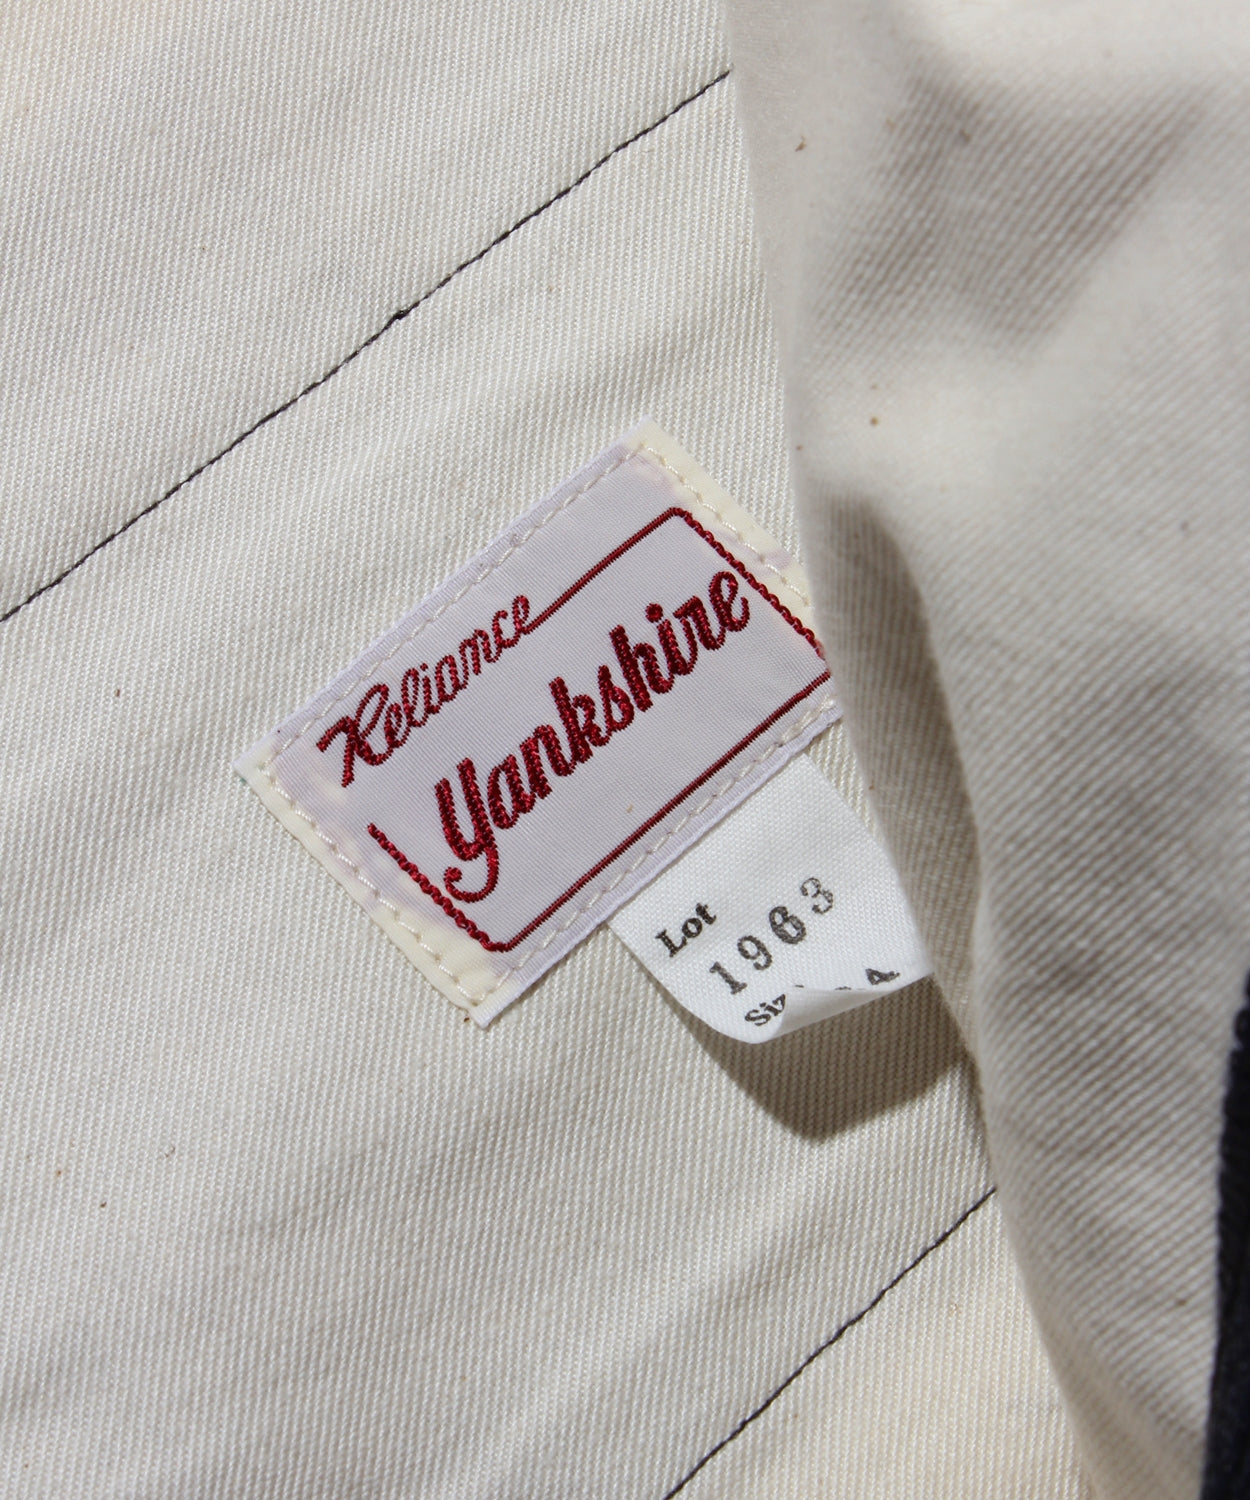 【YANKSHIRE】TROUSERS 1963 STAY PRESSED TWILL / NAVY